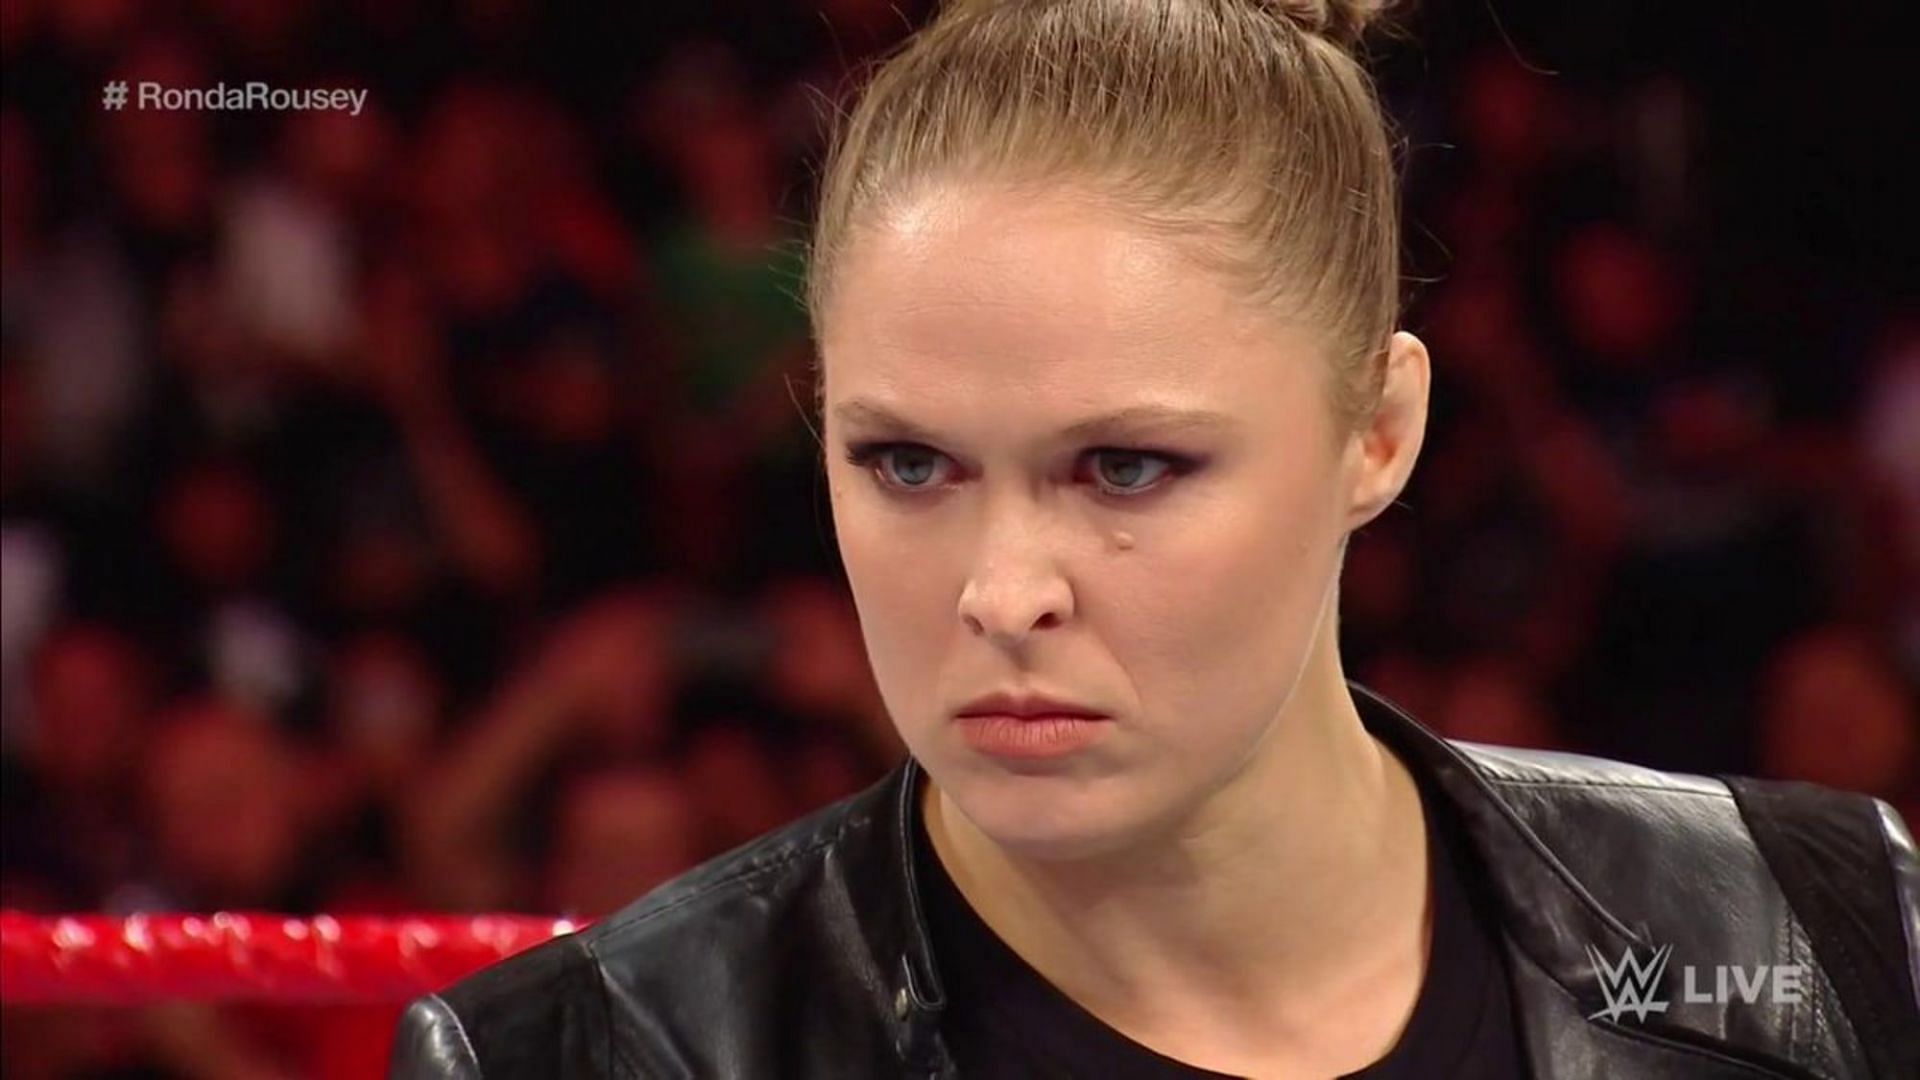 Ronda Rousey had a one-year in-ring stint in WWE.